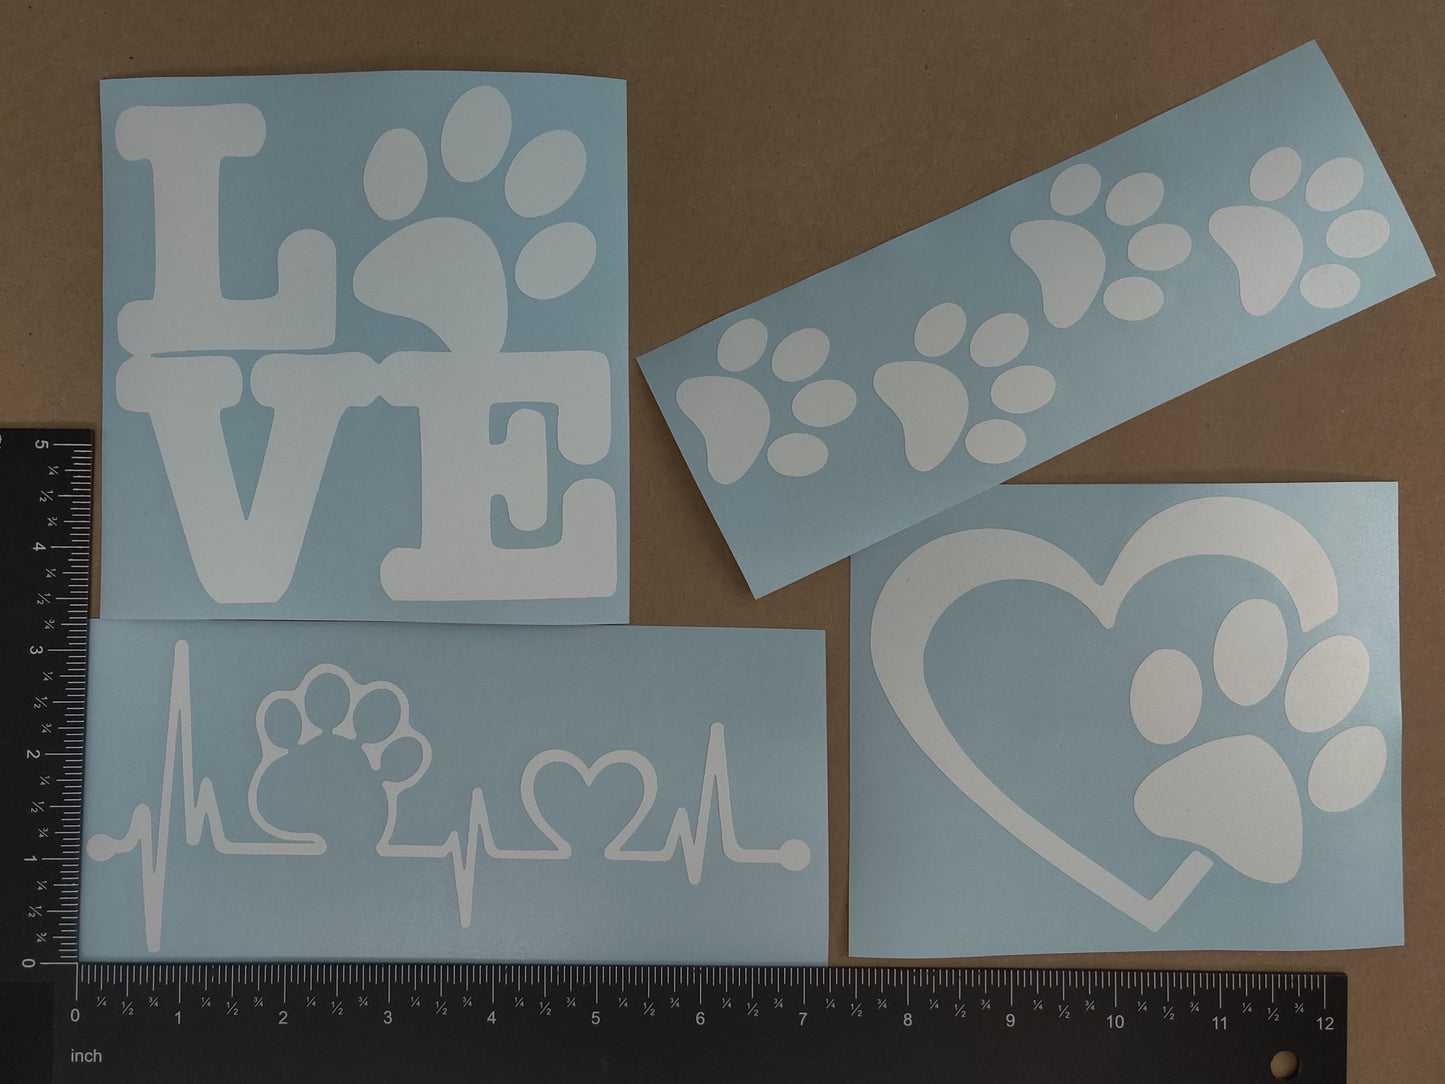 Paw Heartbeat Decals 4 pack